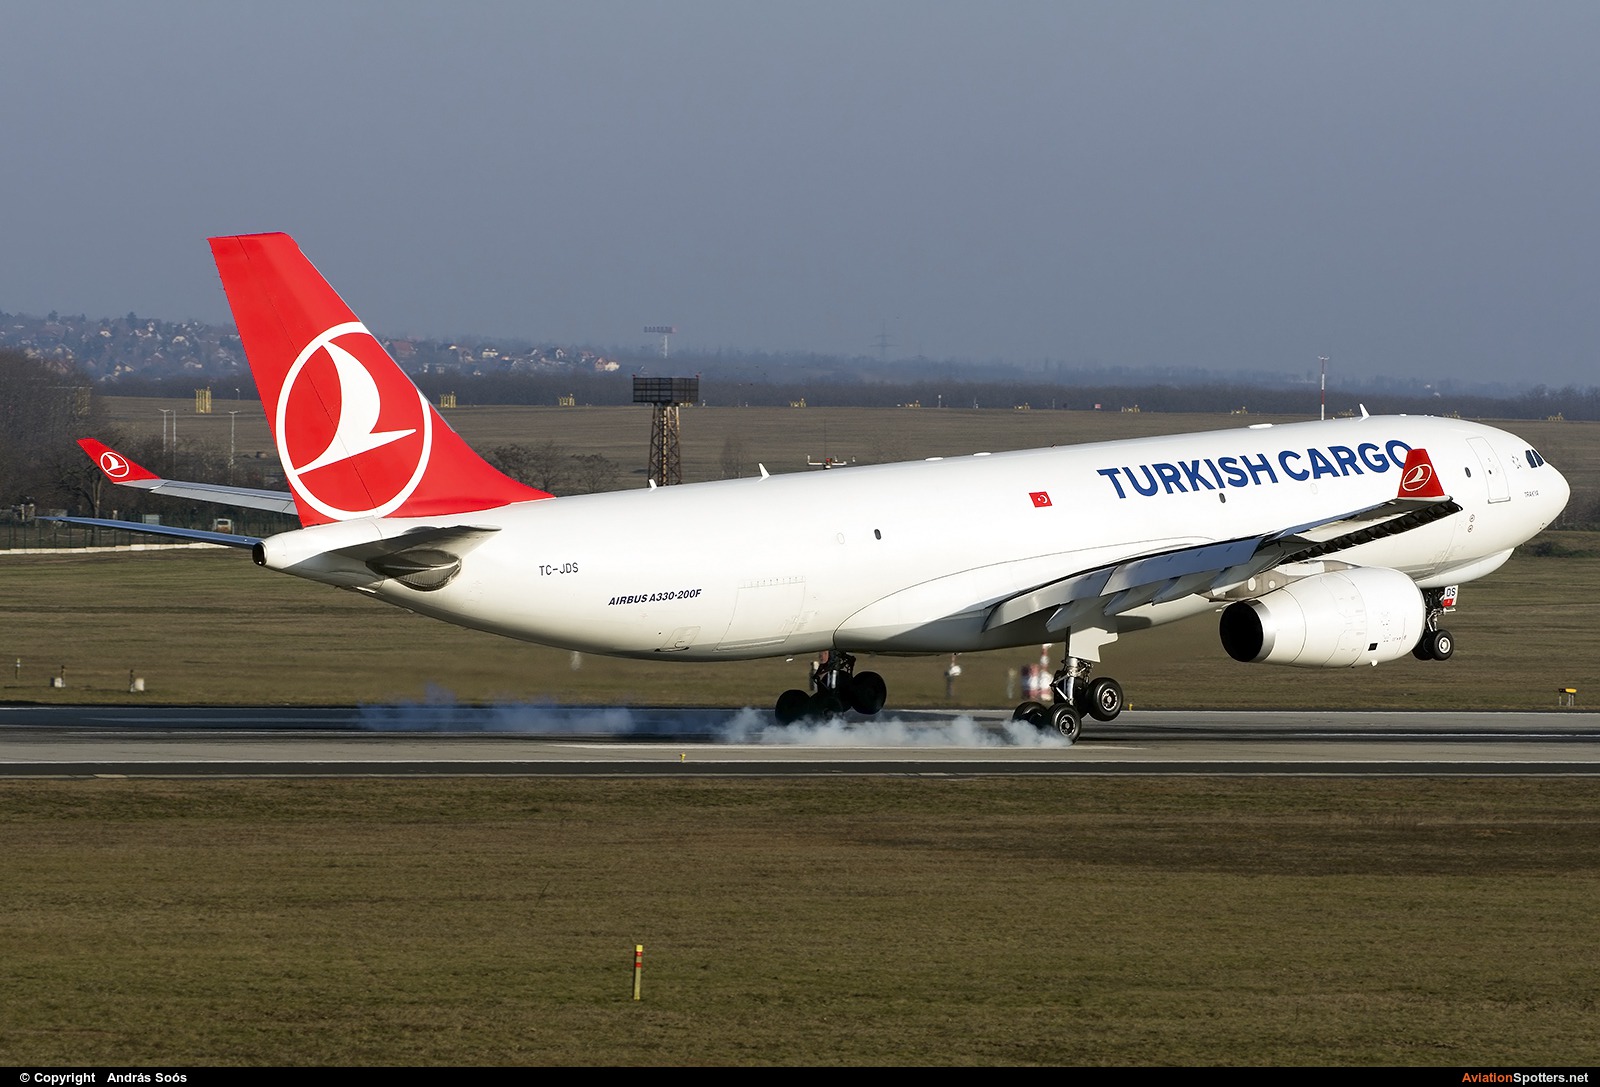 Turkish Airlines Cargo  -  A330-200F  (TC-JDS) By András Soós (sas1965)